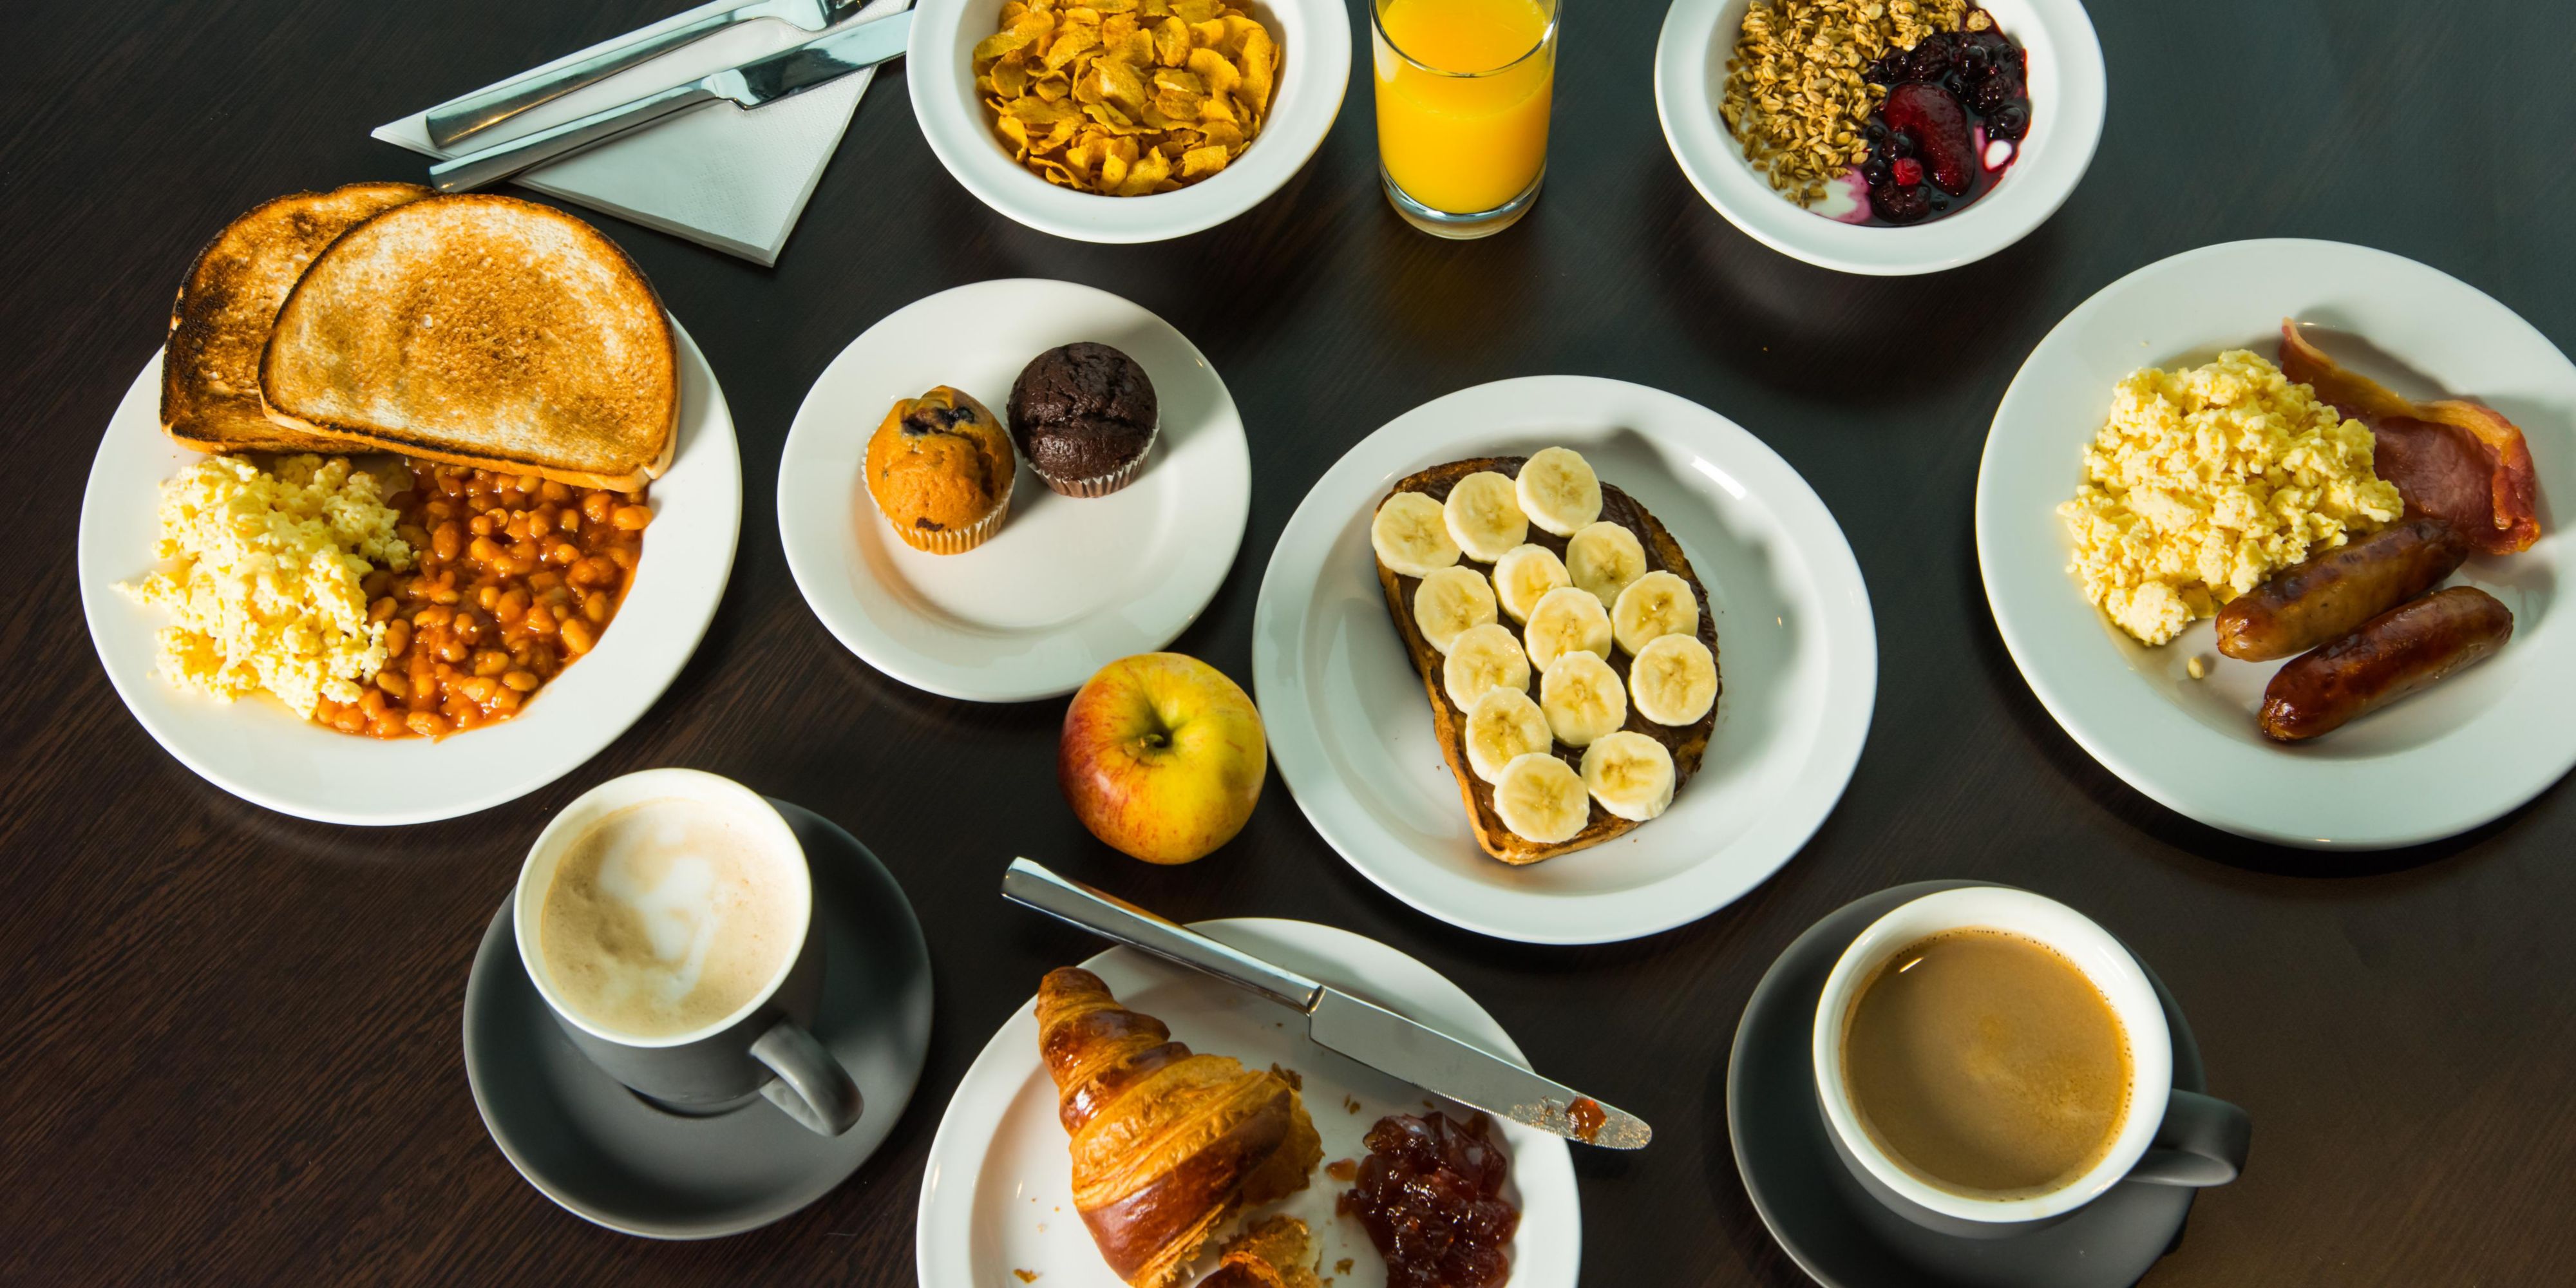 Kick-start your morning with out inclusive breakfast. Choose from a selection of hot and cold items like bacon, scrambled egg, sausages, toast and pastries. Grab & go bags are available if you're in a hurry!